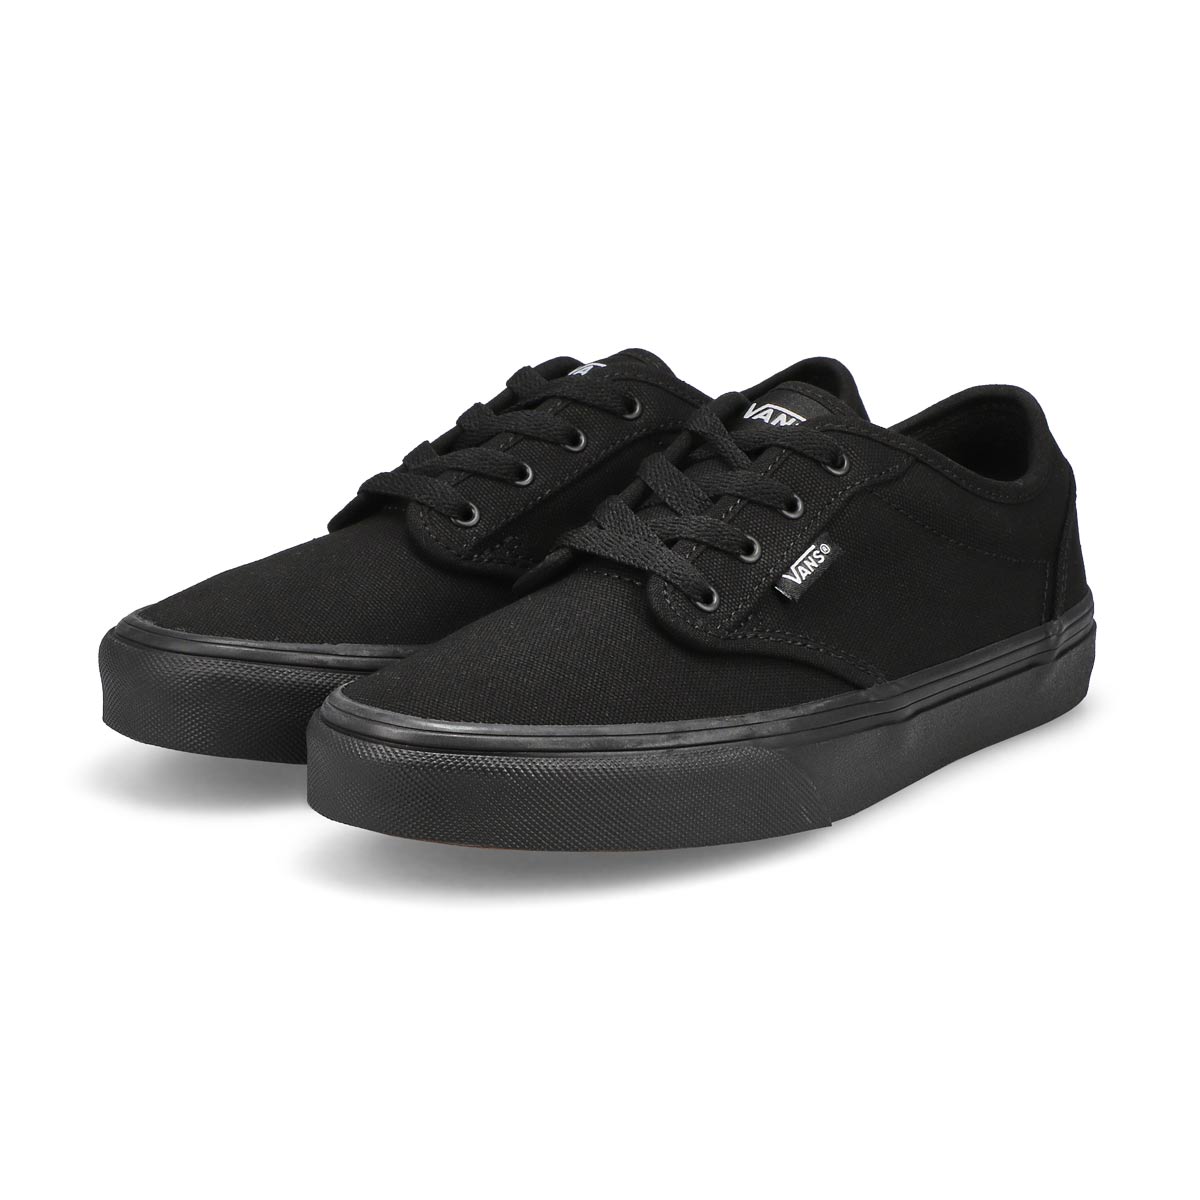 Boys' Atwood  Canvas Lace Up Sneaker - Black